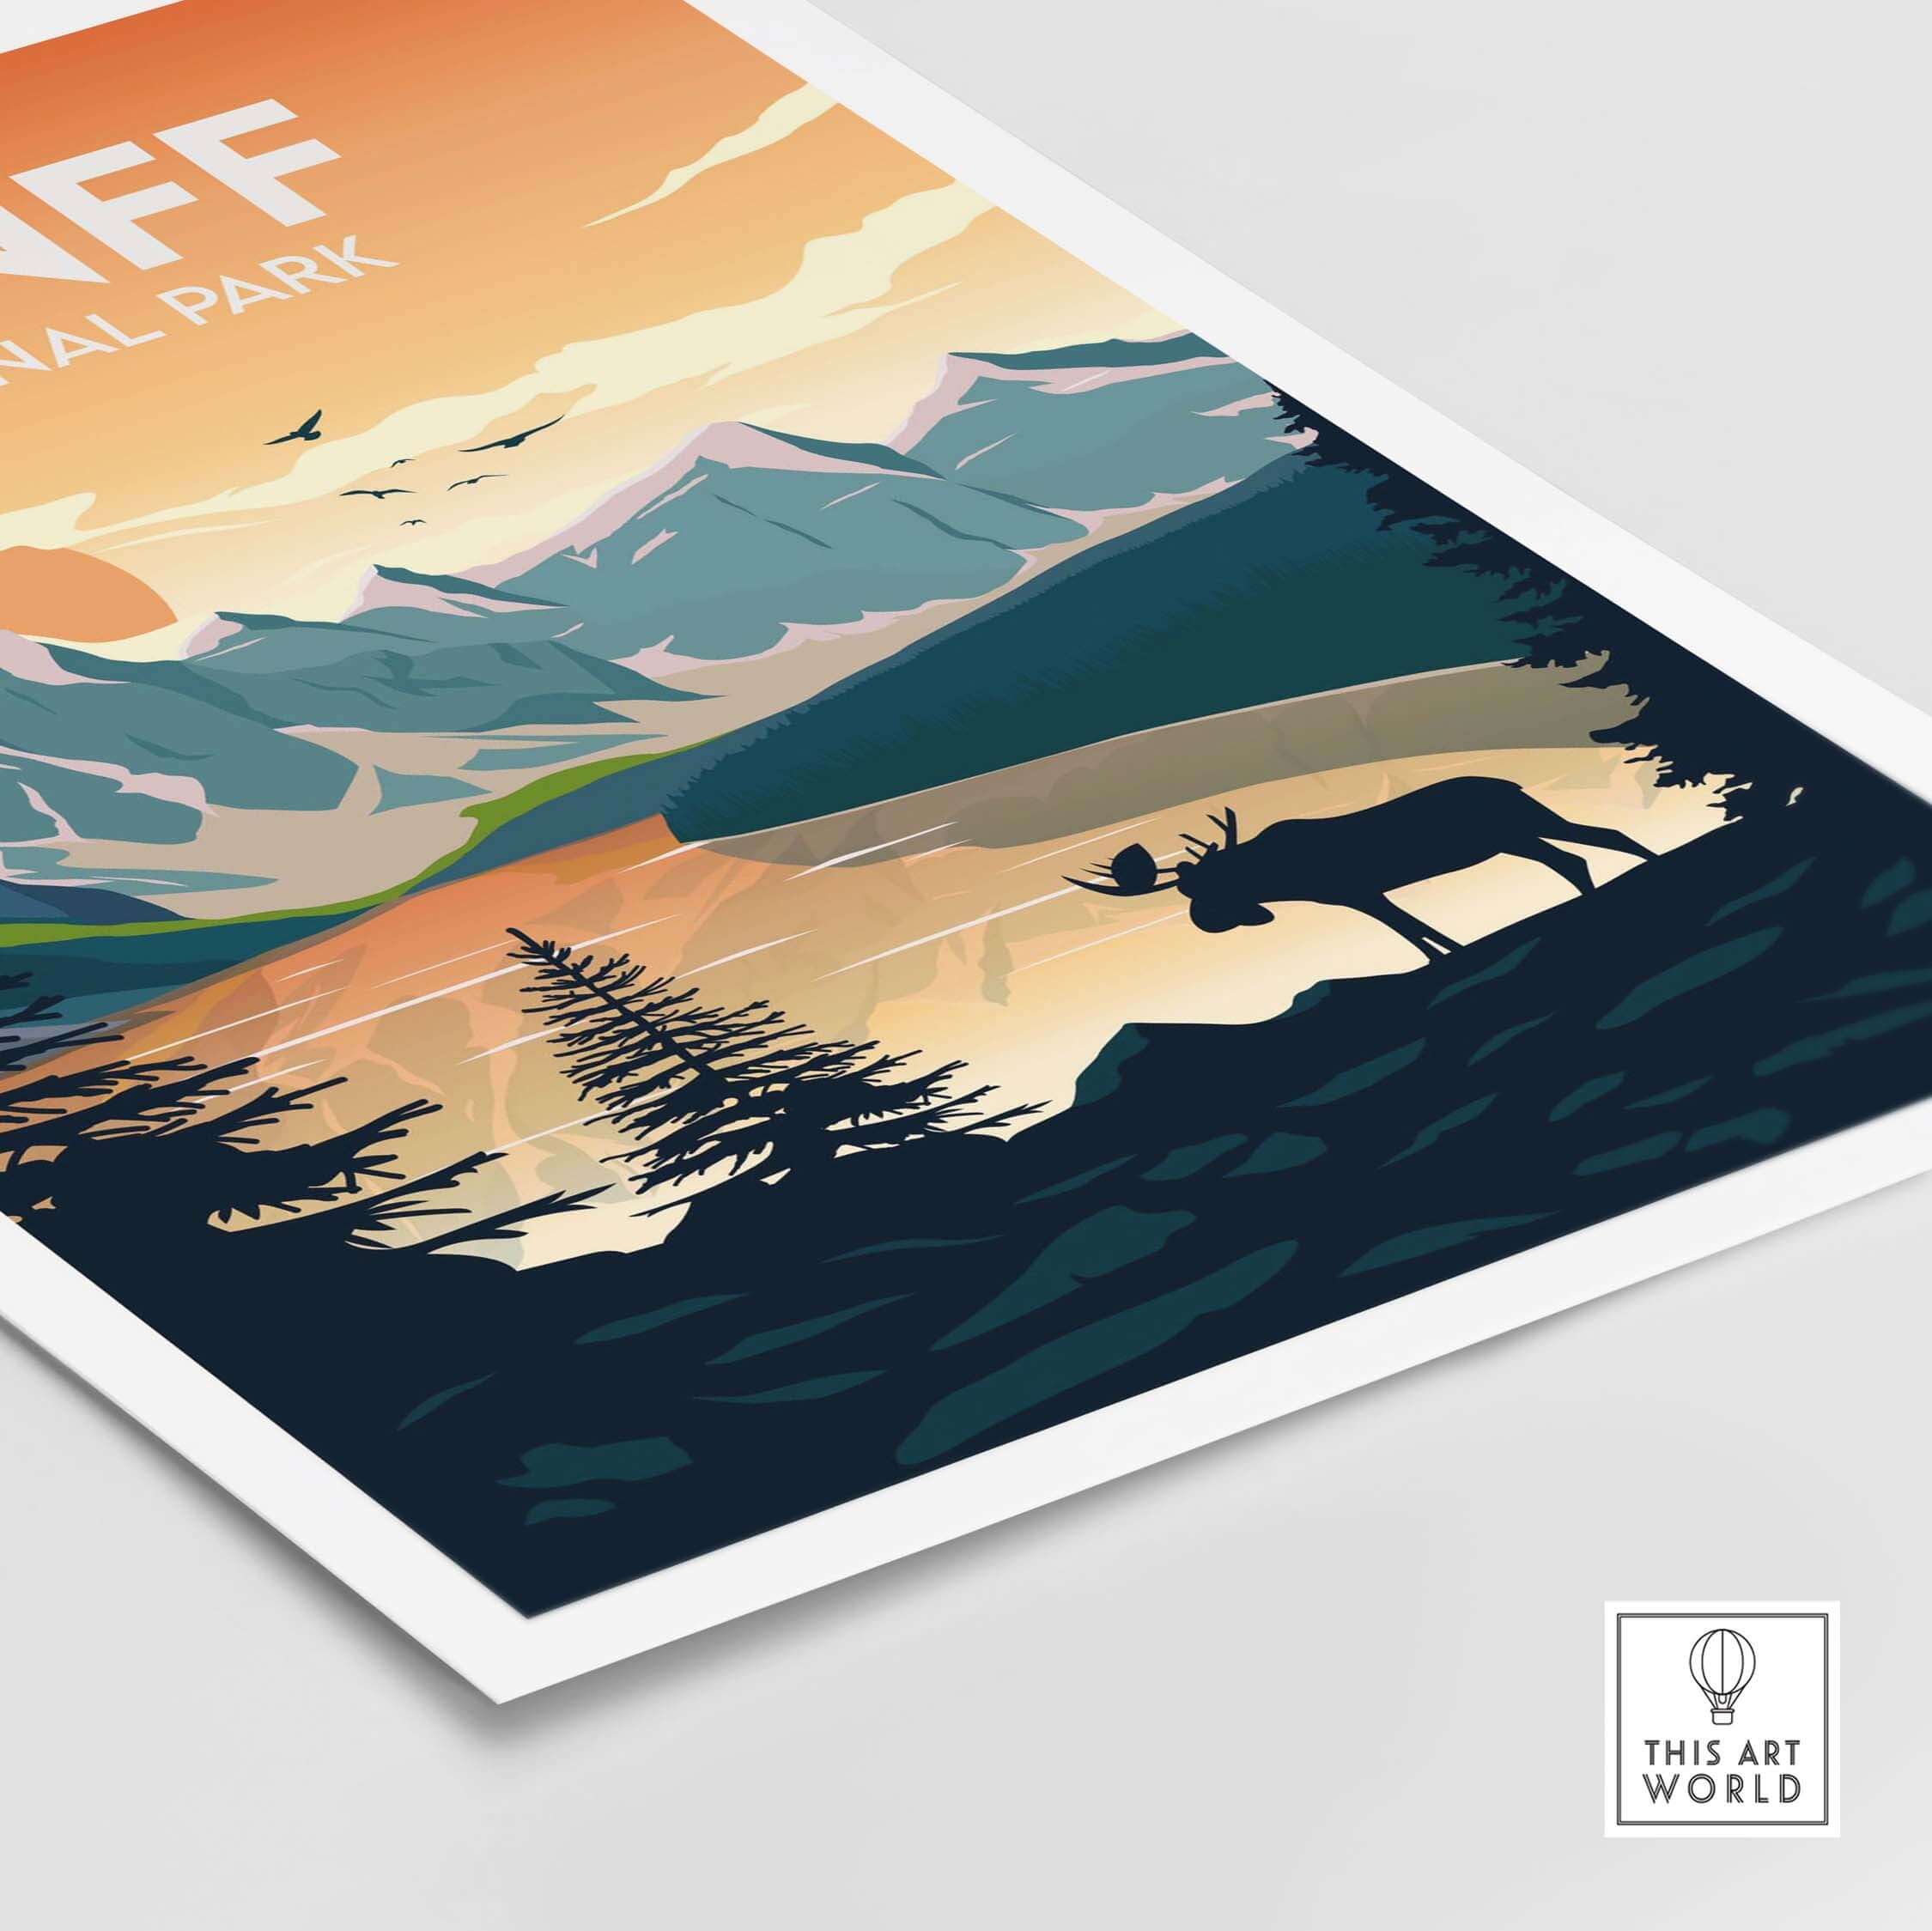 Canadian National Park Posters | Decor Art Wall